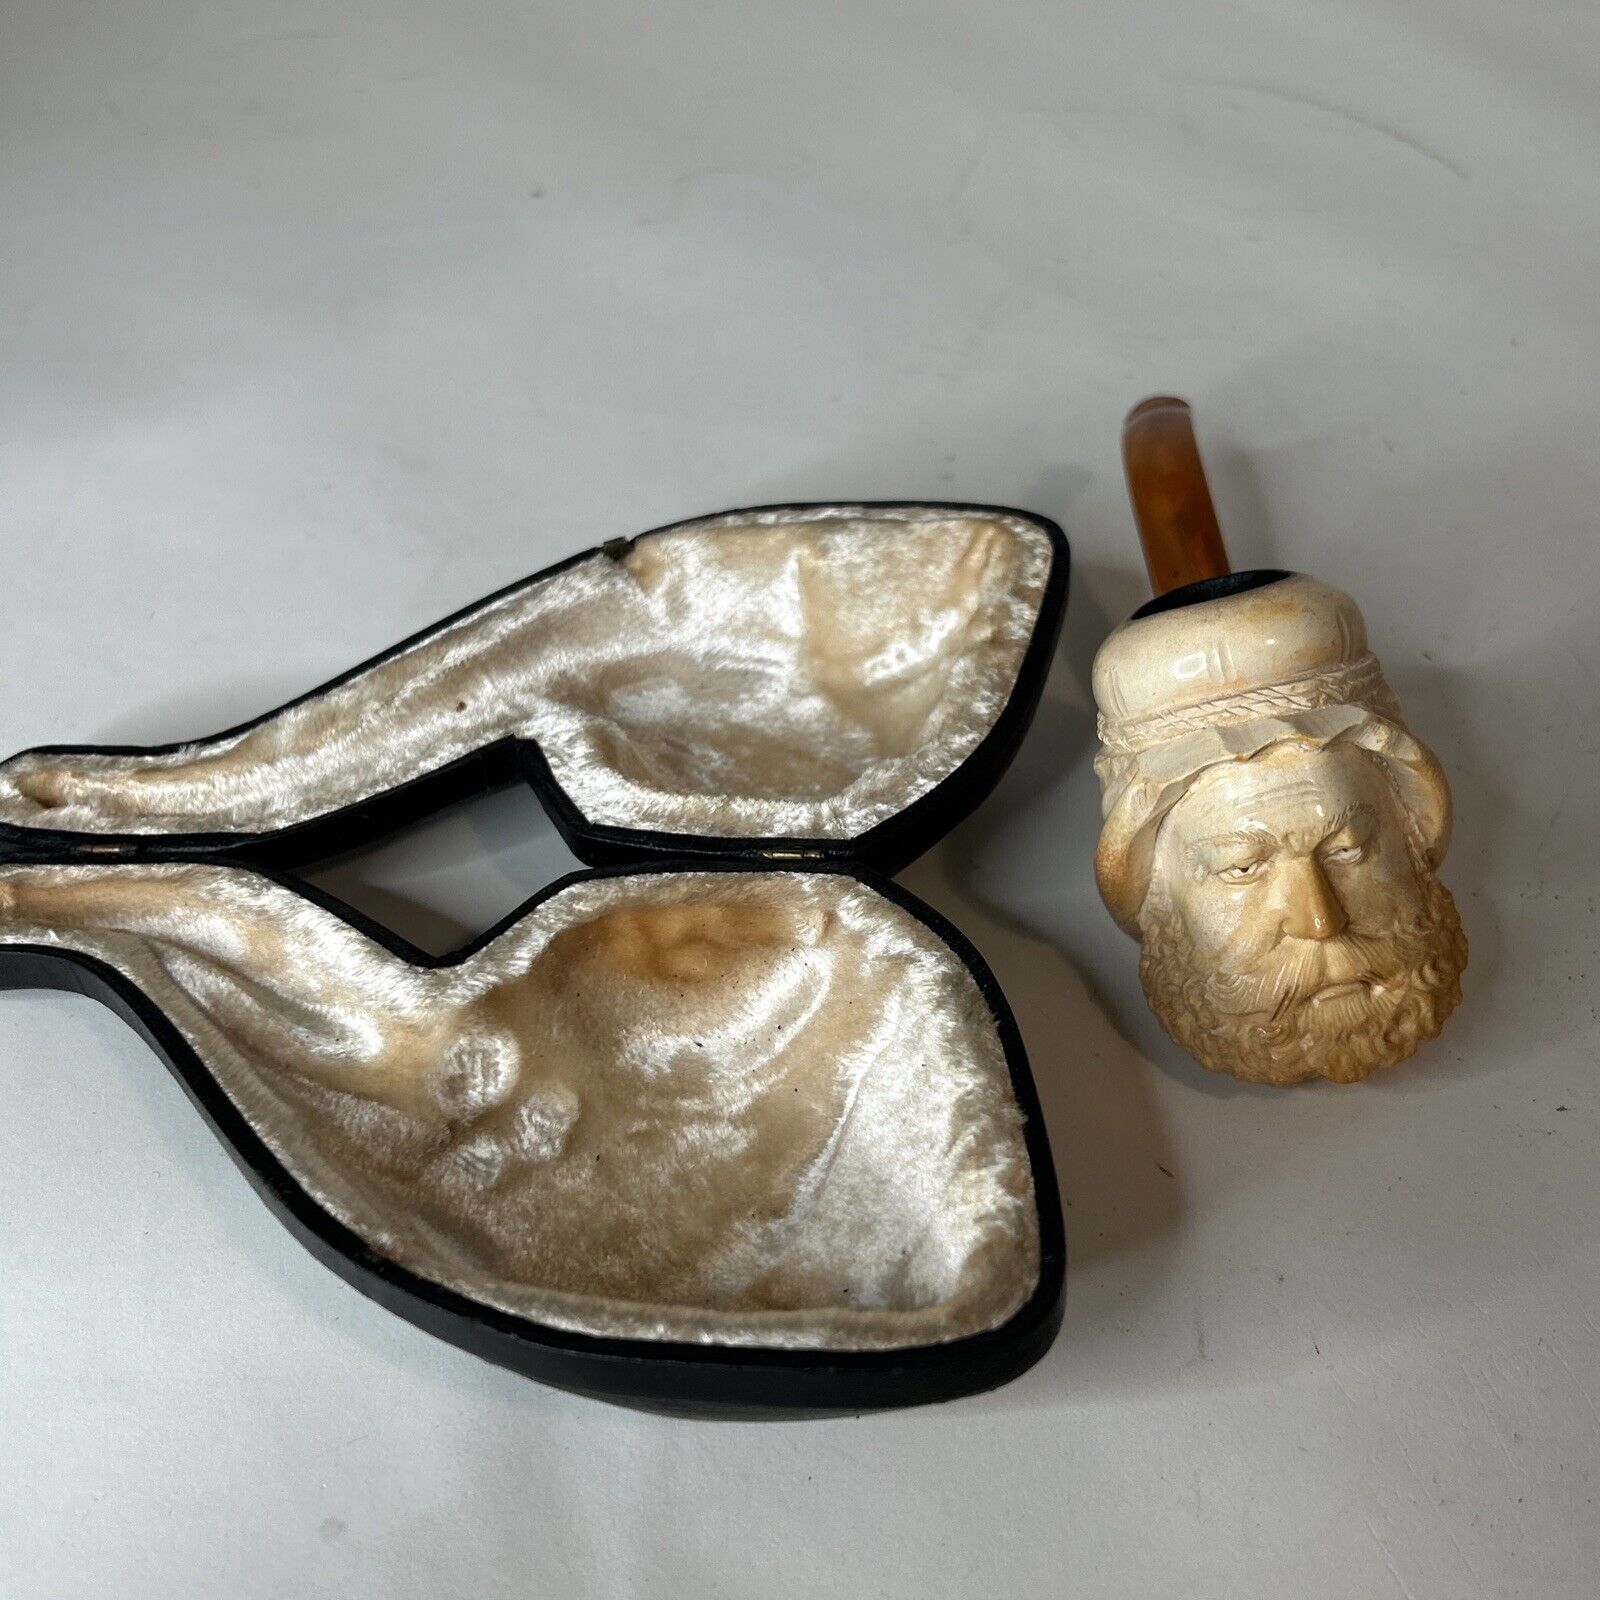 Vintage Unique Meerschaum Hand-Carved Bearded Man Pipe with Case